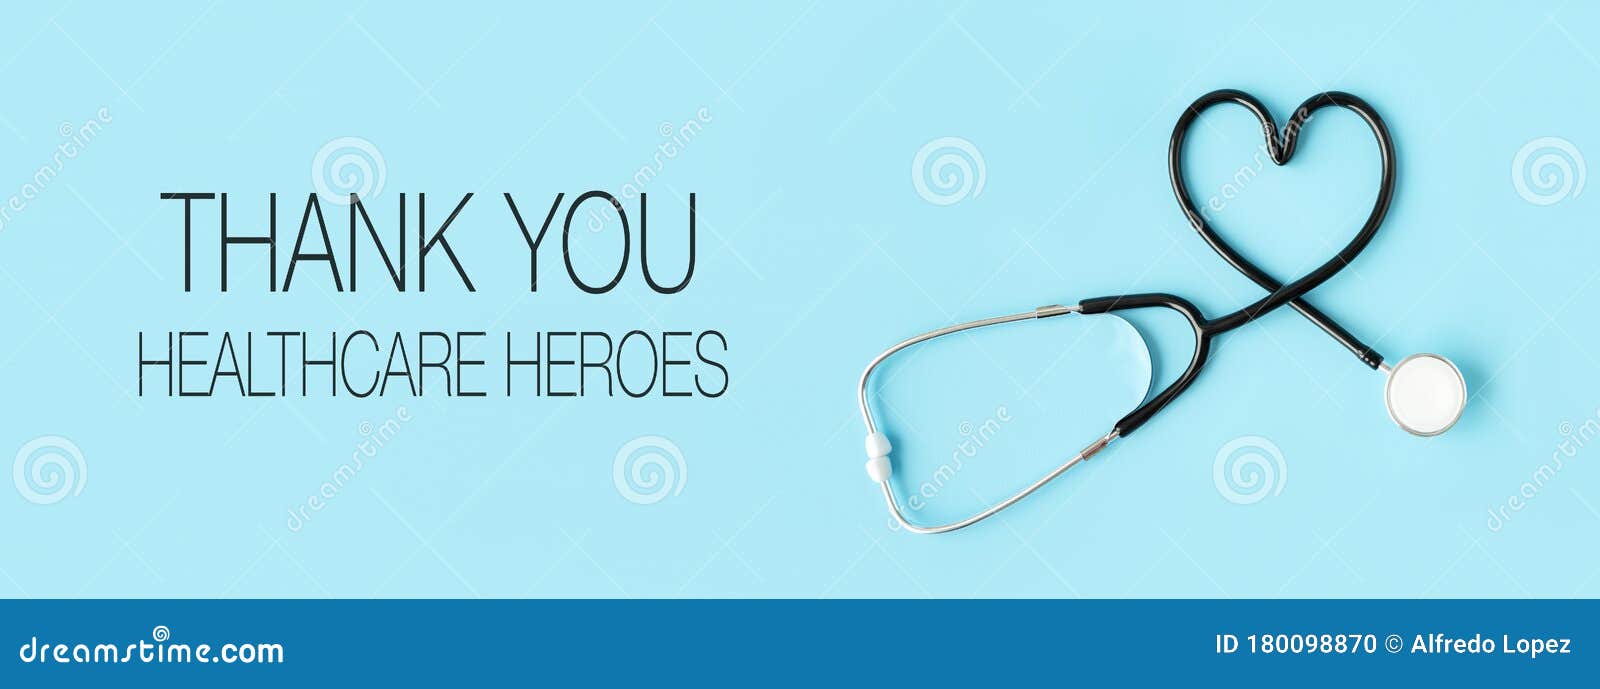 thank you healthcare heroes message with stethoscope forming a heart on pastel blue background